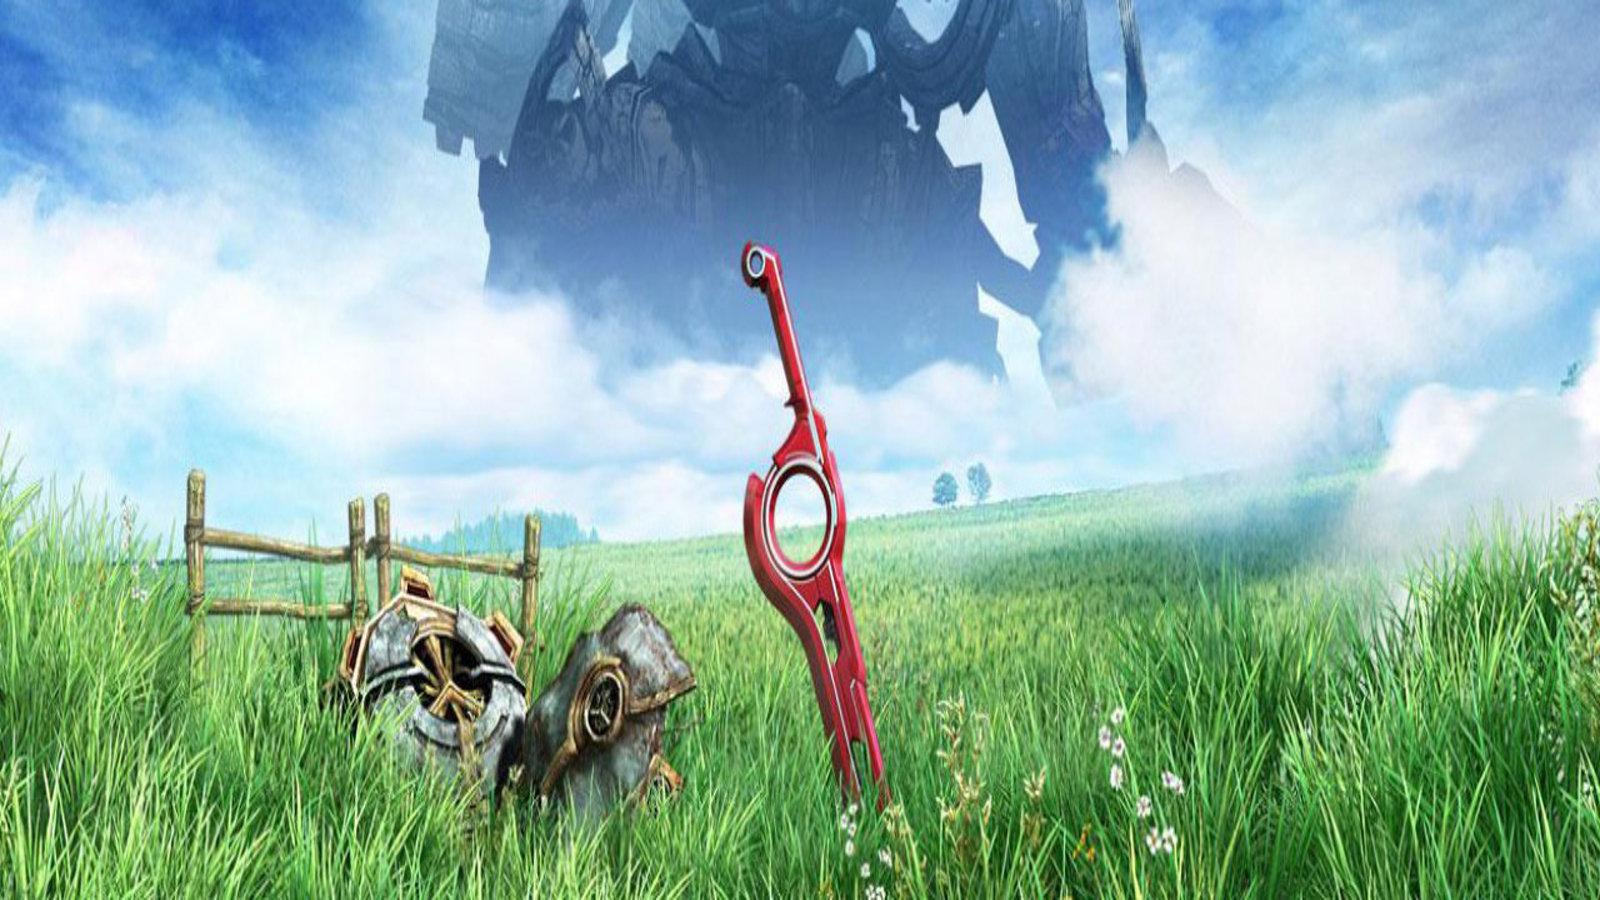 GAME REVIEW: Xenoblade Chronicles 3 – The Boss Rush Network